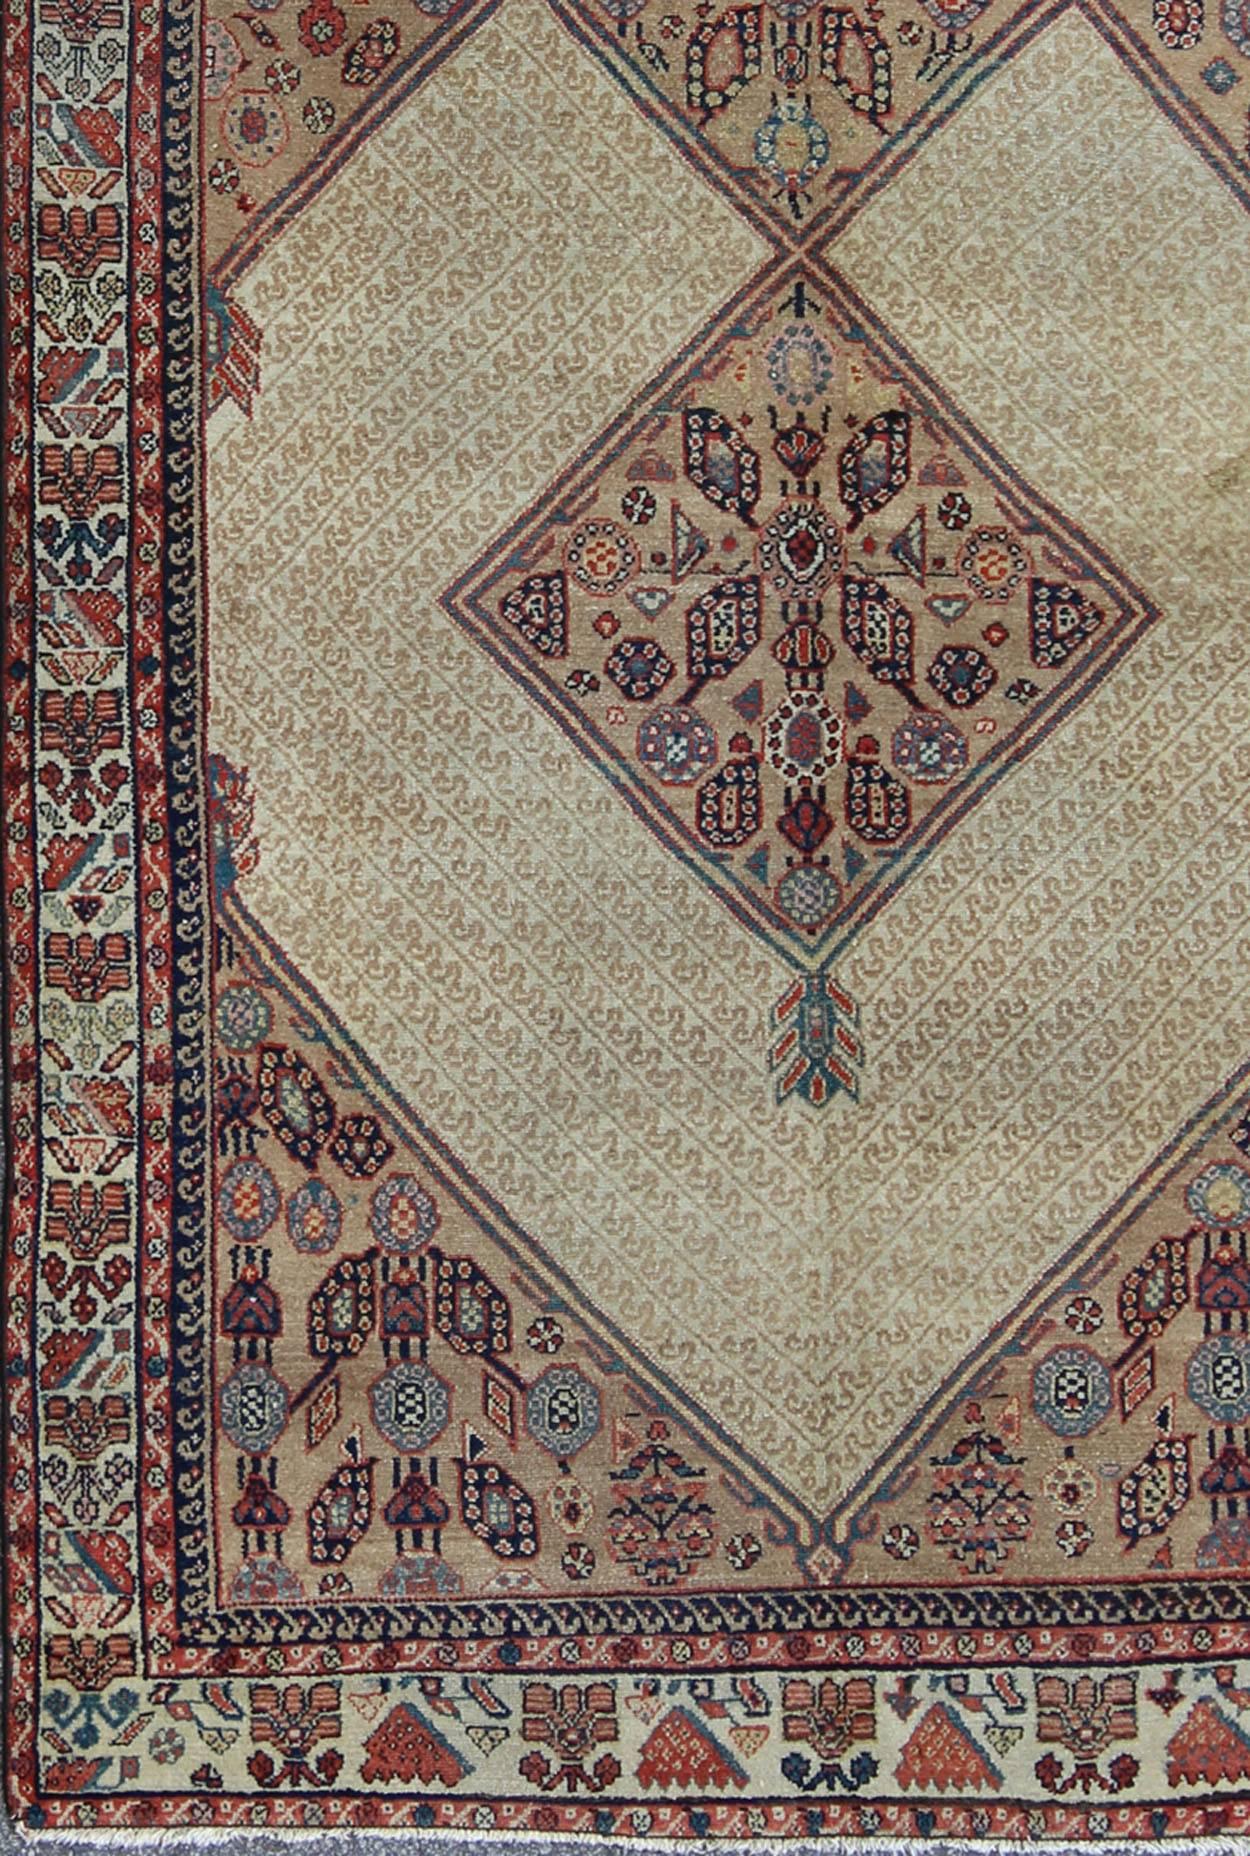 This beautiful antique late 19th Century Persian Serab runner rests on a camel background, which surrounds the three diamond medallions of alternating ivory, red, and blue colors. The main border is composed of ivory with a repeating geometric